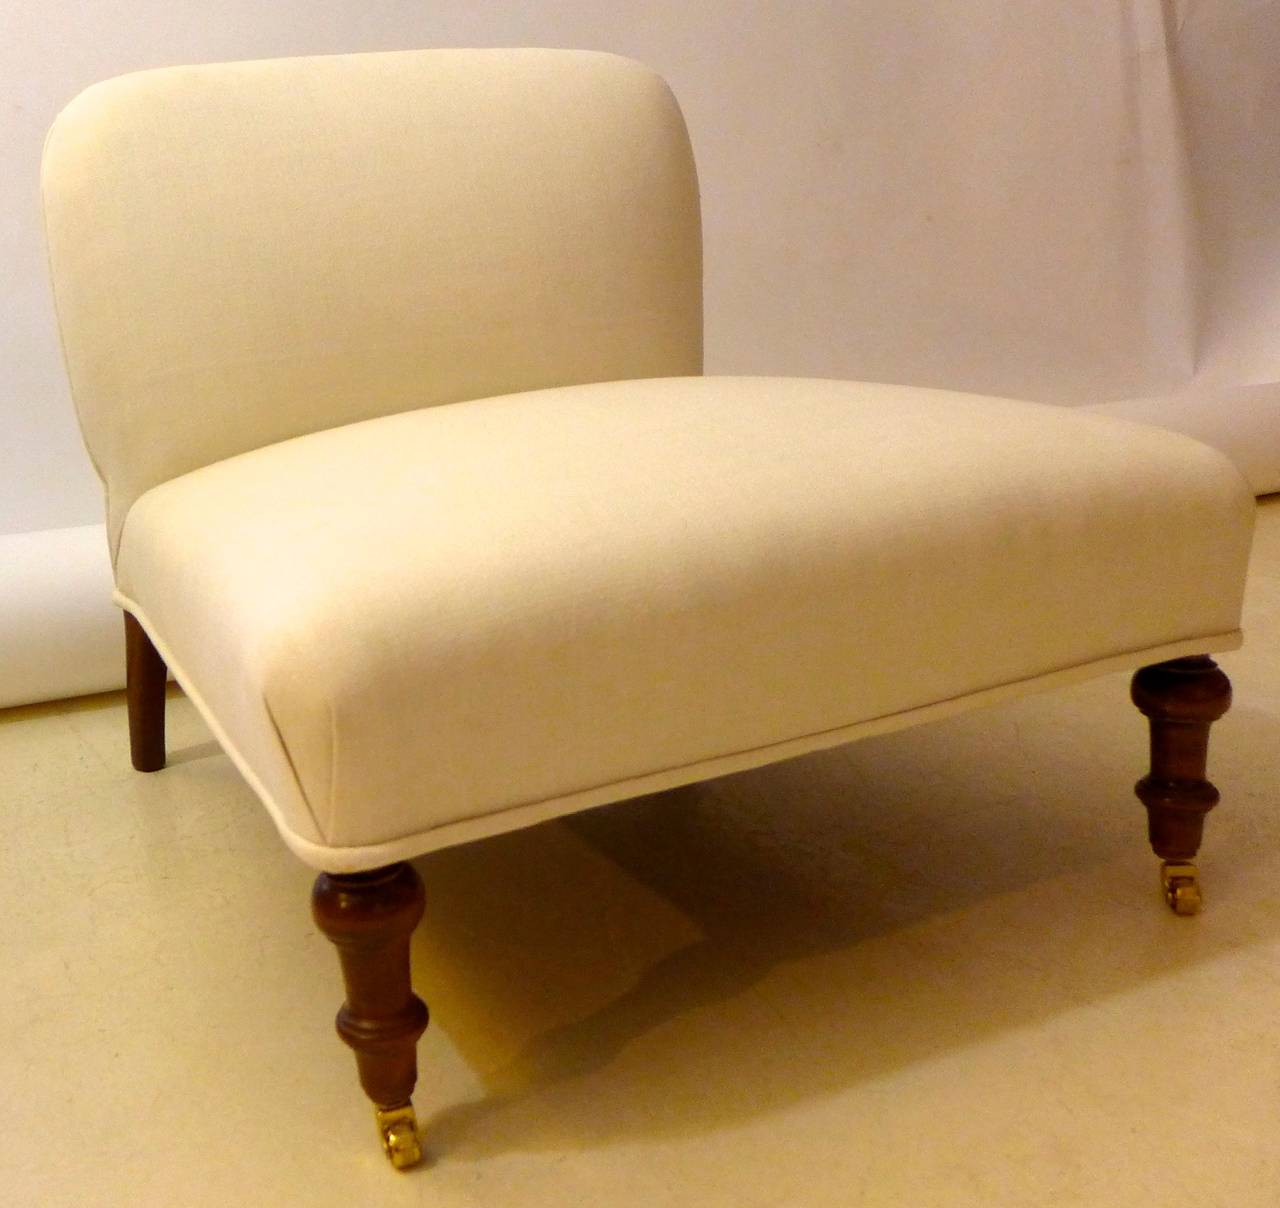 Turned French Slipper Chair in the Napoleon III Style